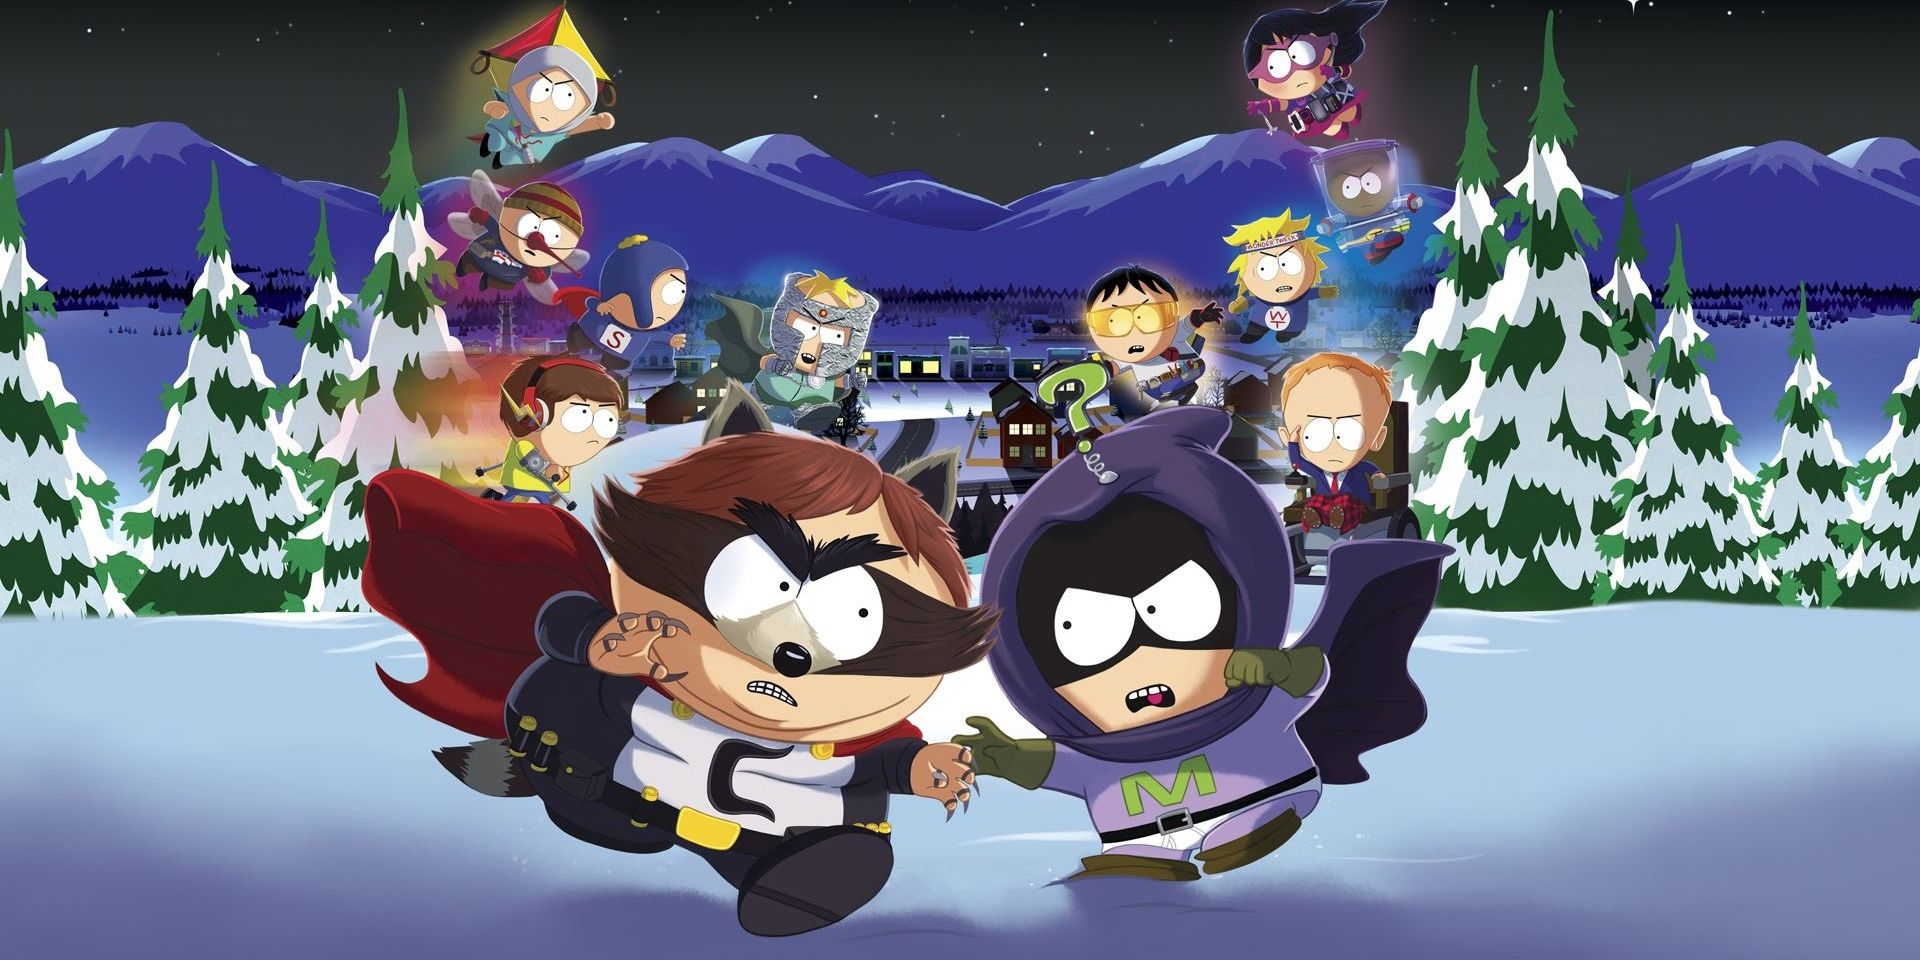 Promotional art for South Park The Fractured But Whole.